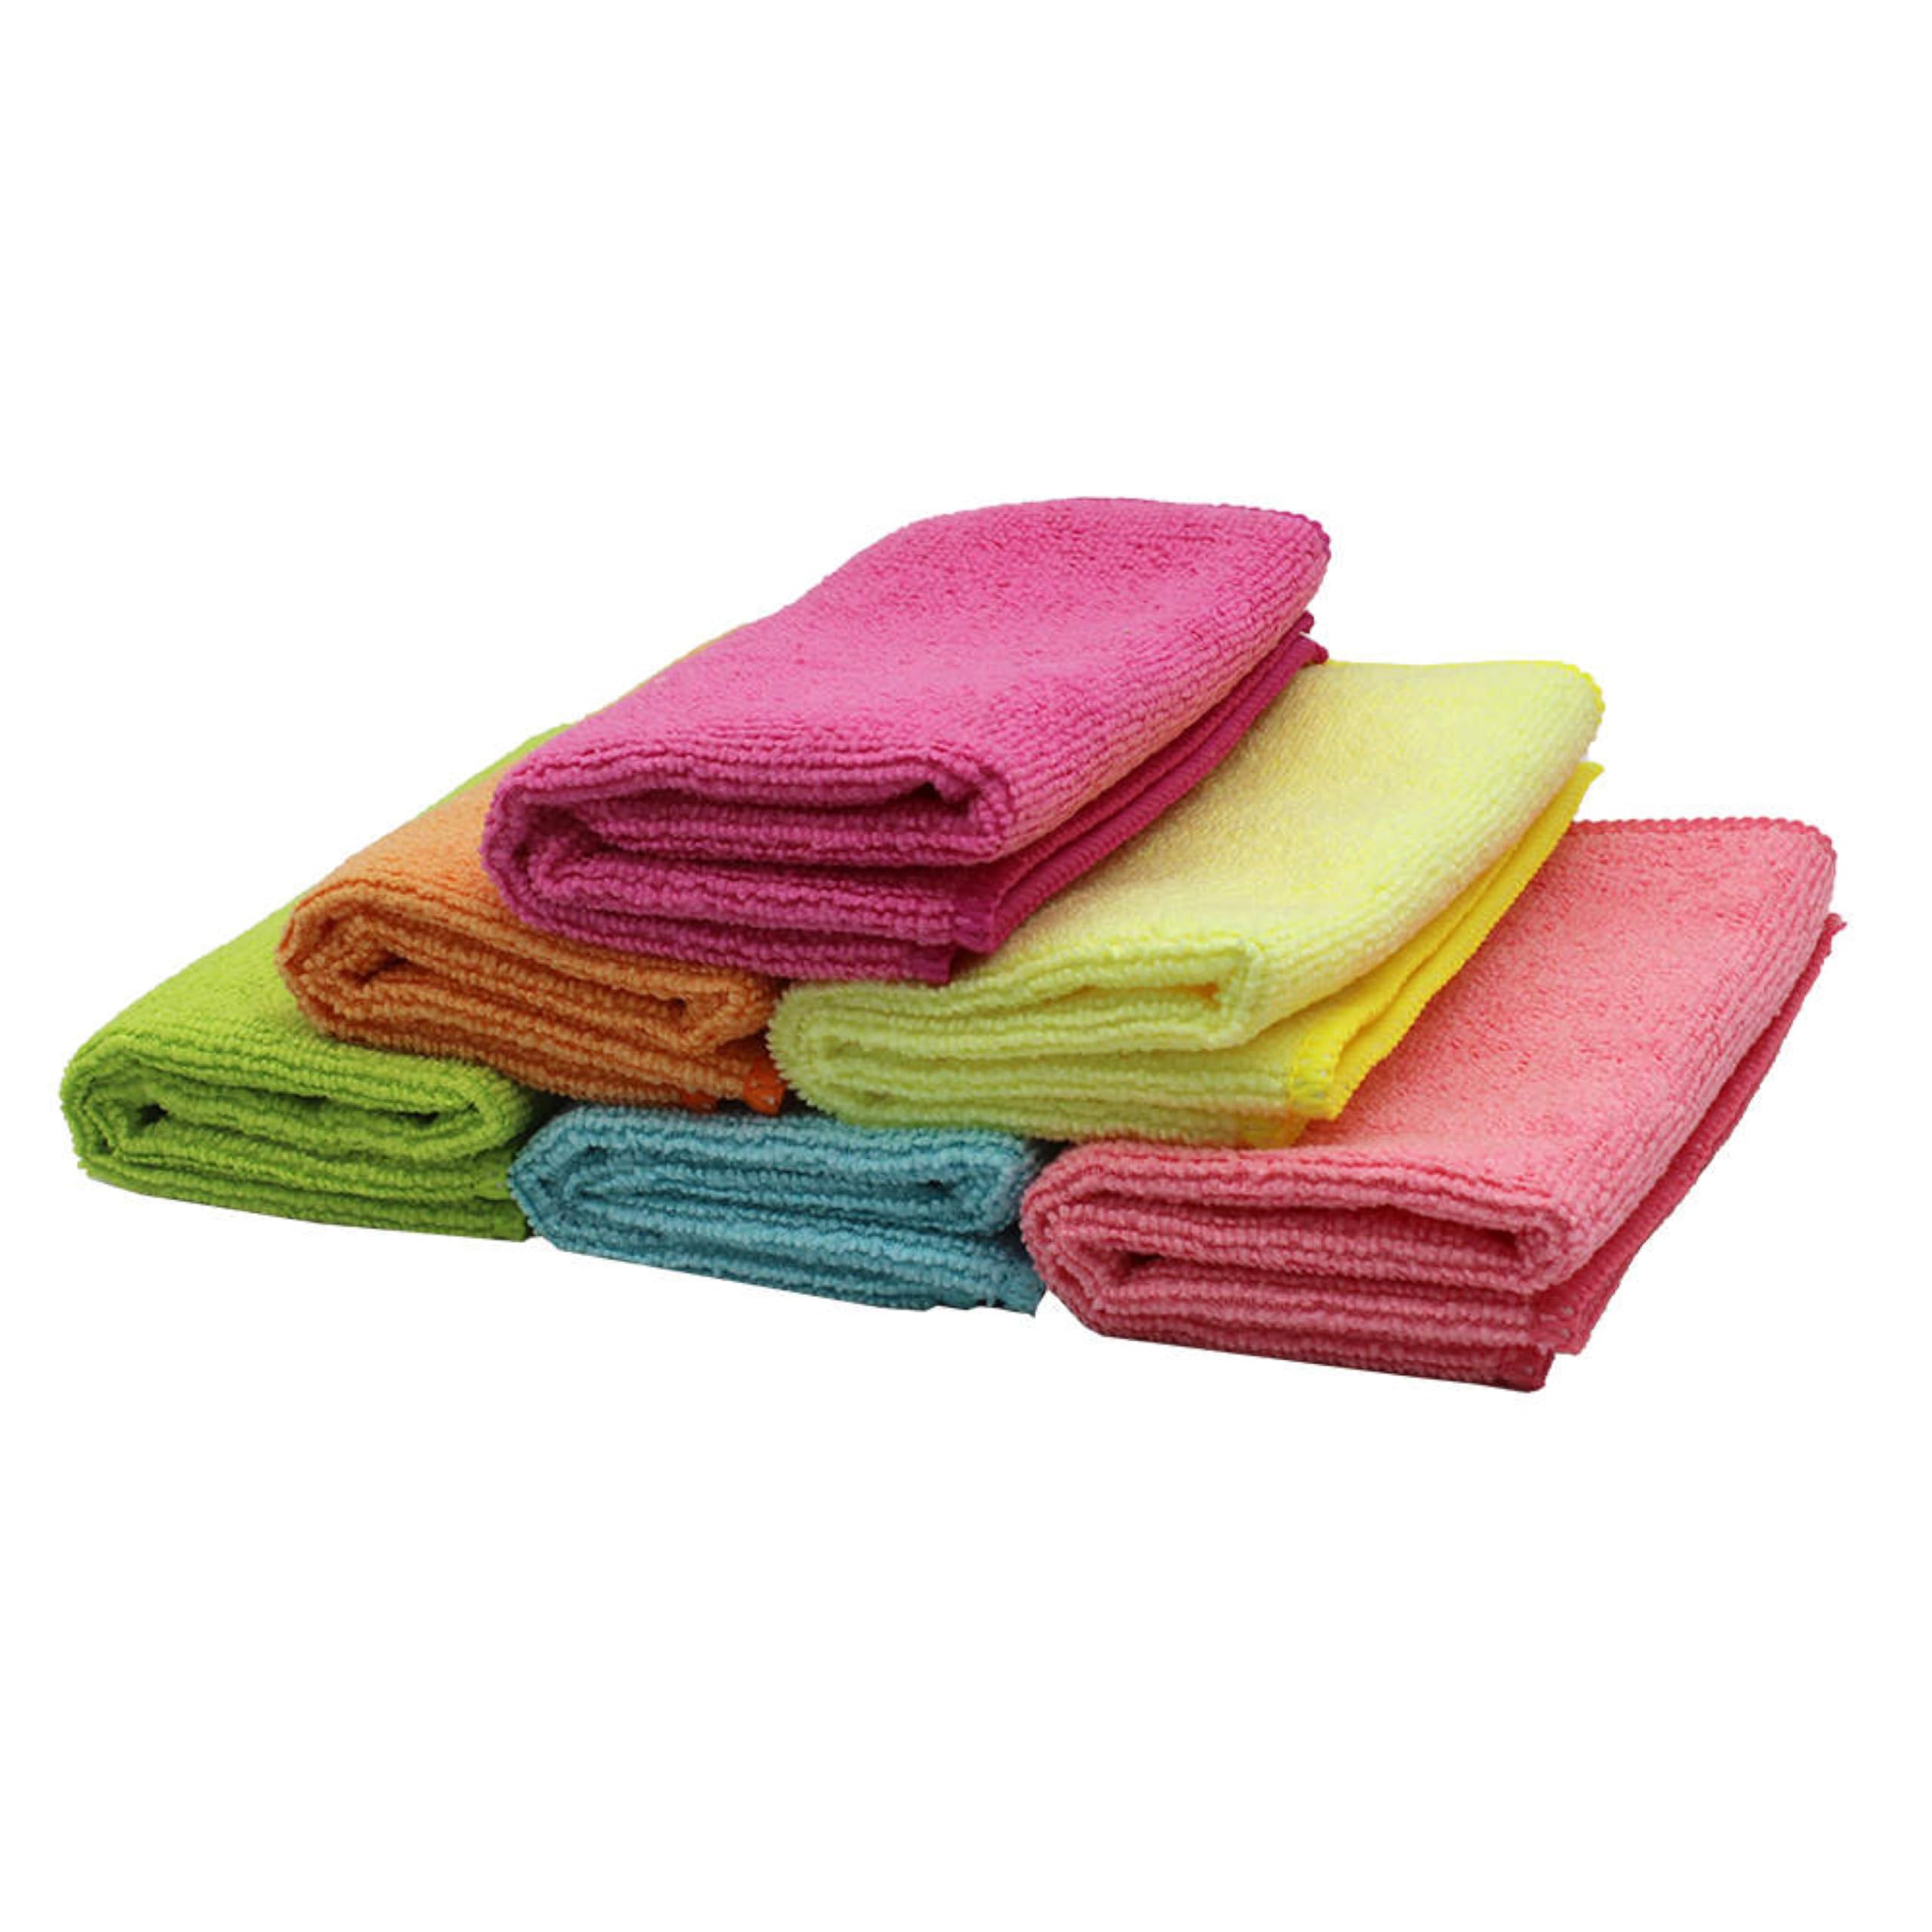 Super Absorbent Lint Free Glass Cleaning Towels Machine Washable Dish Cloths Streak Free For Home Polishing Washing